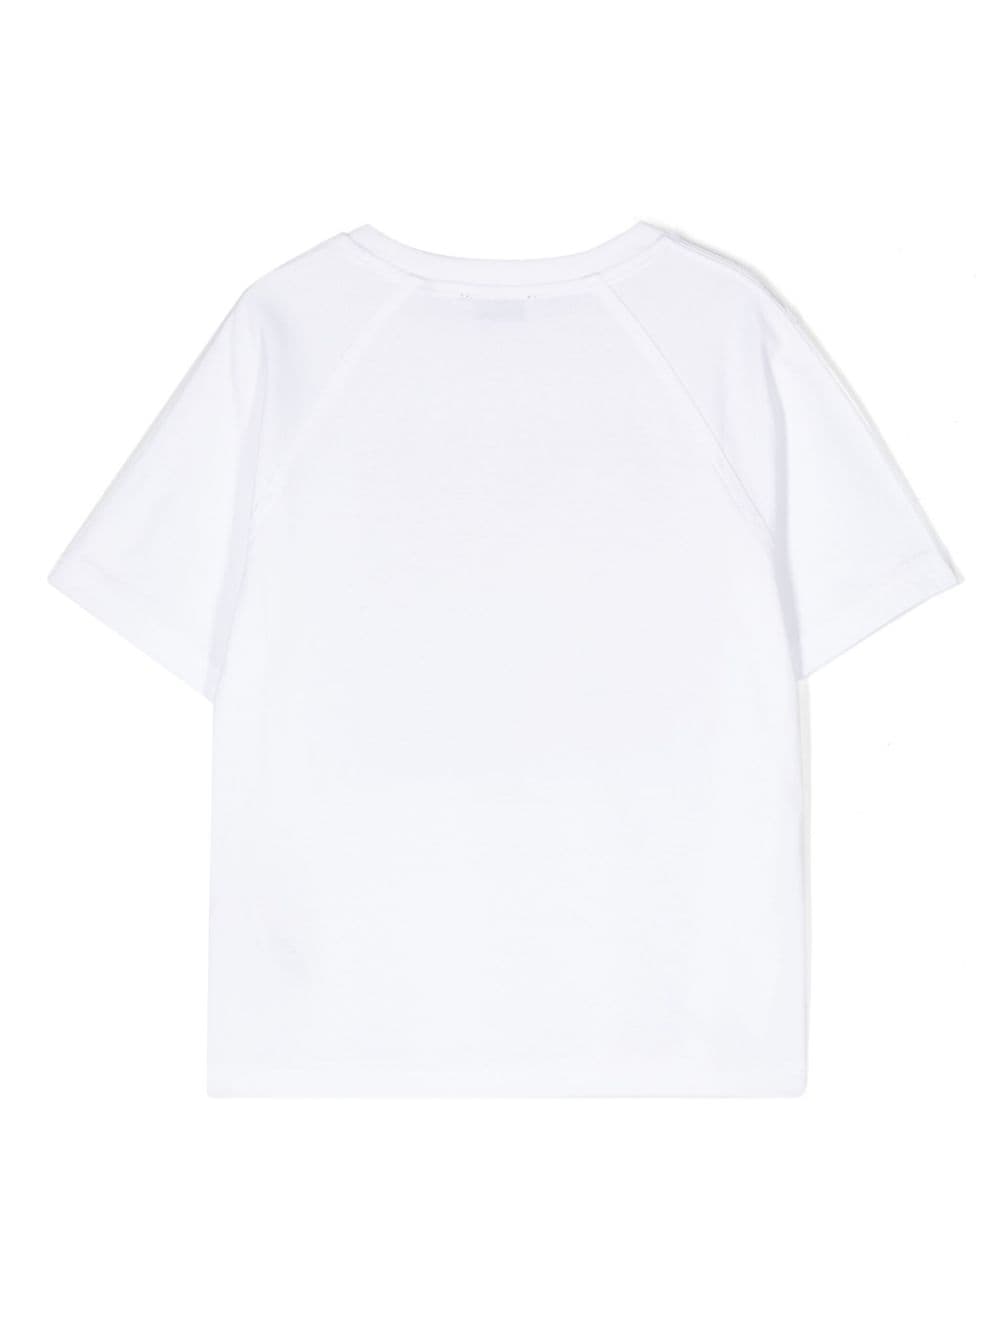 White t-shirt for boys with print